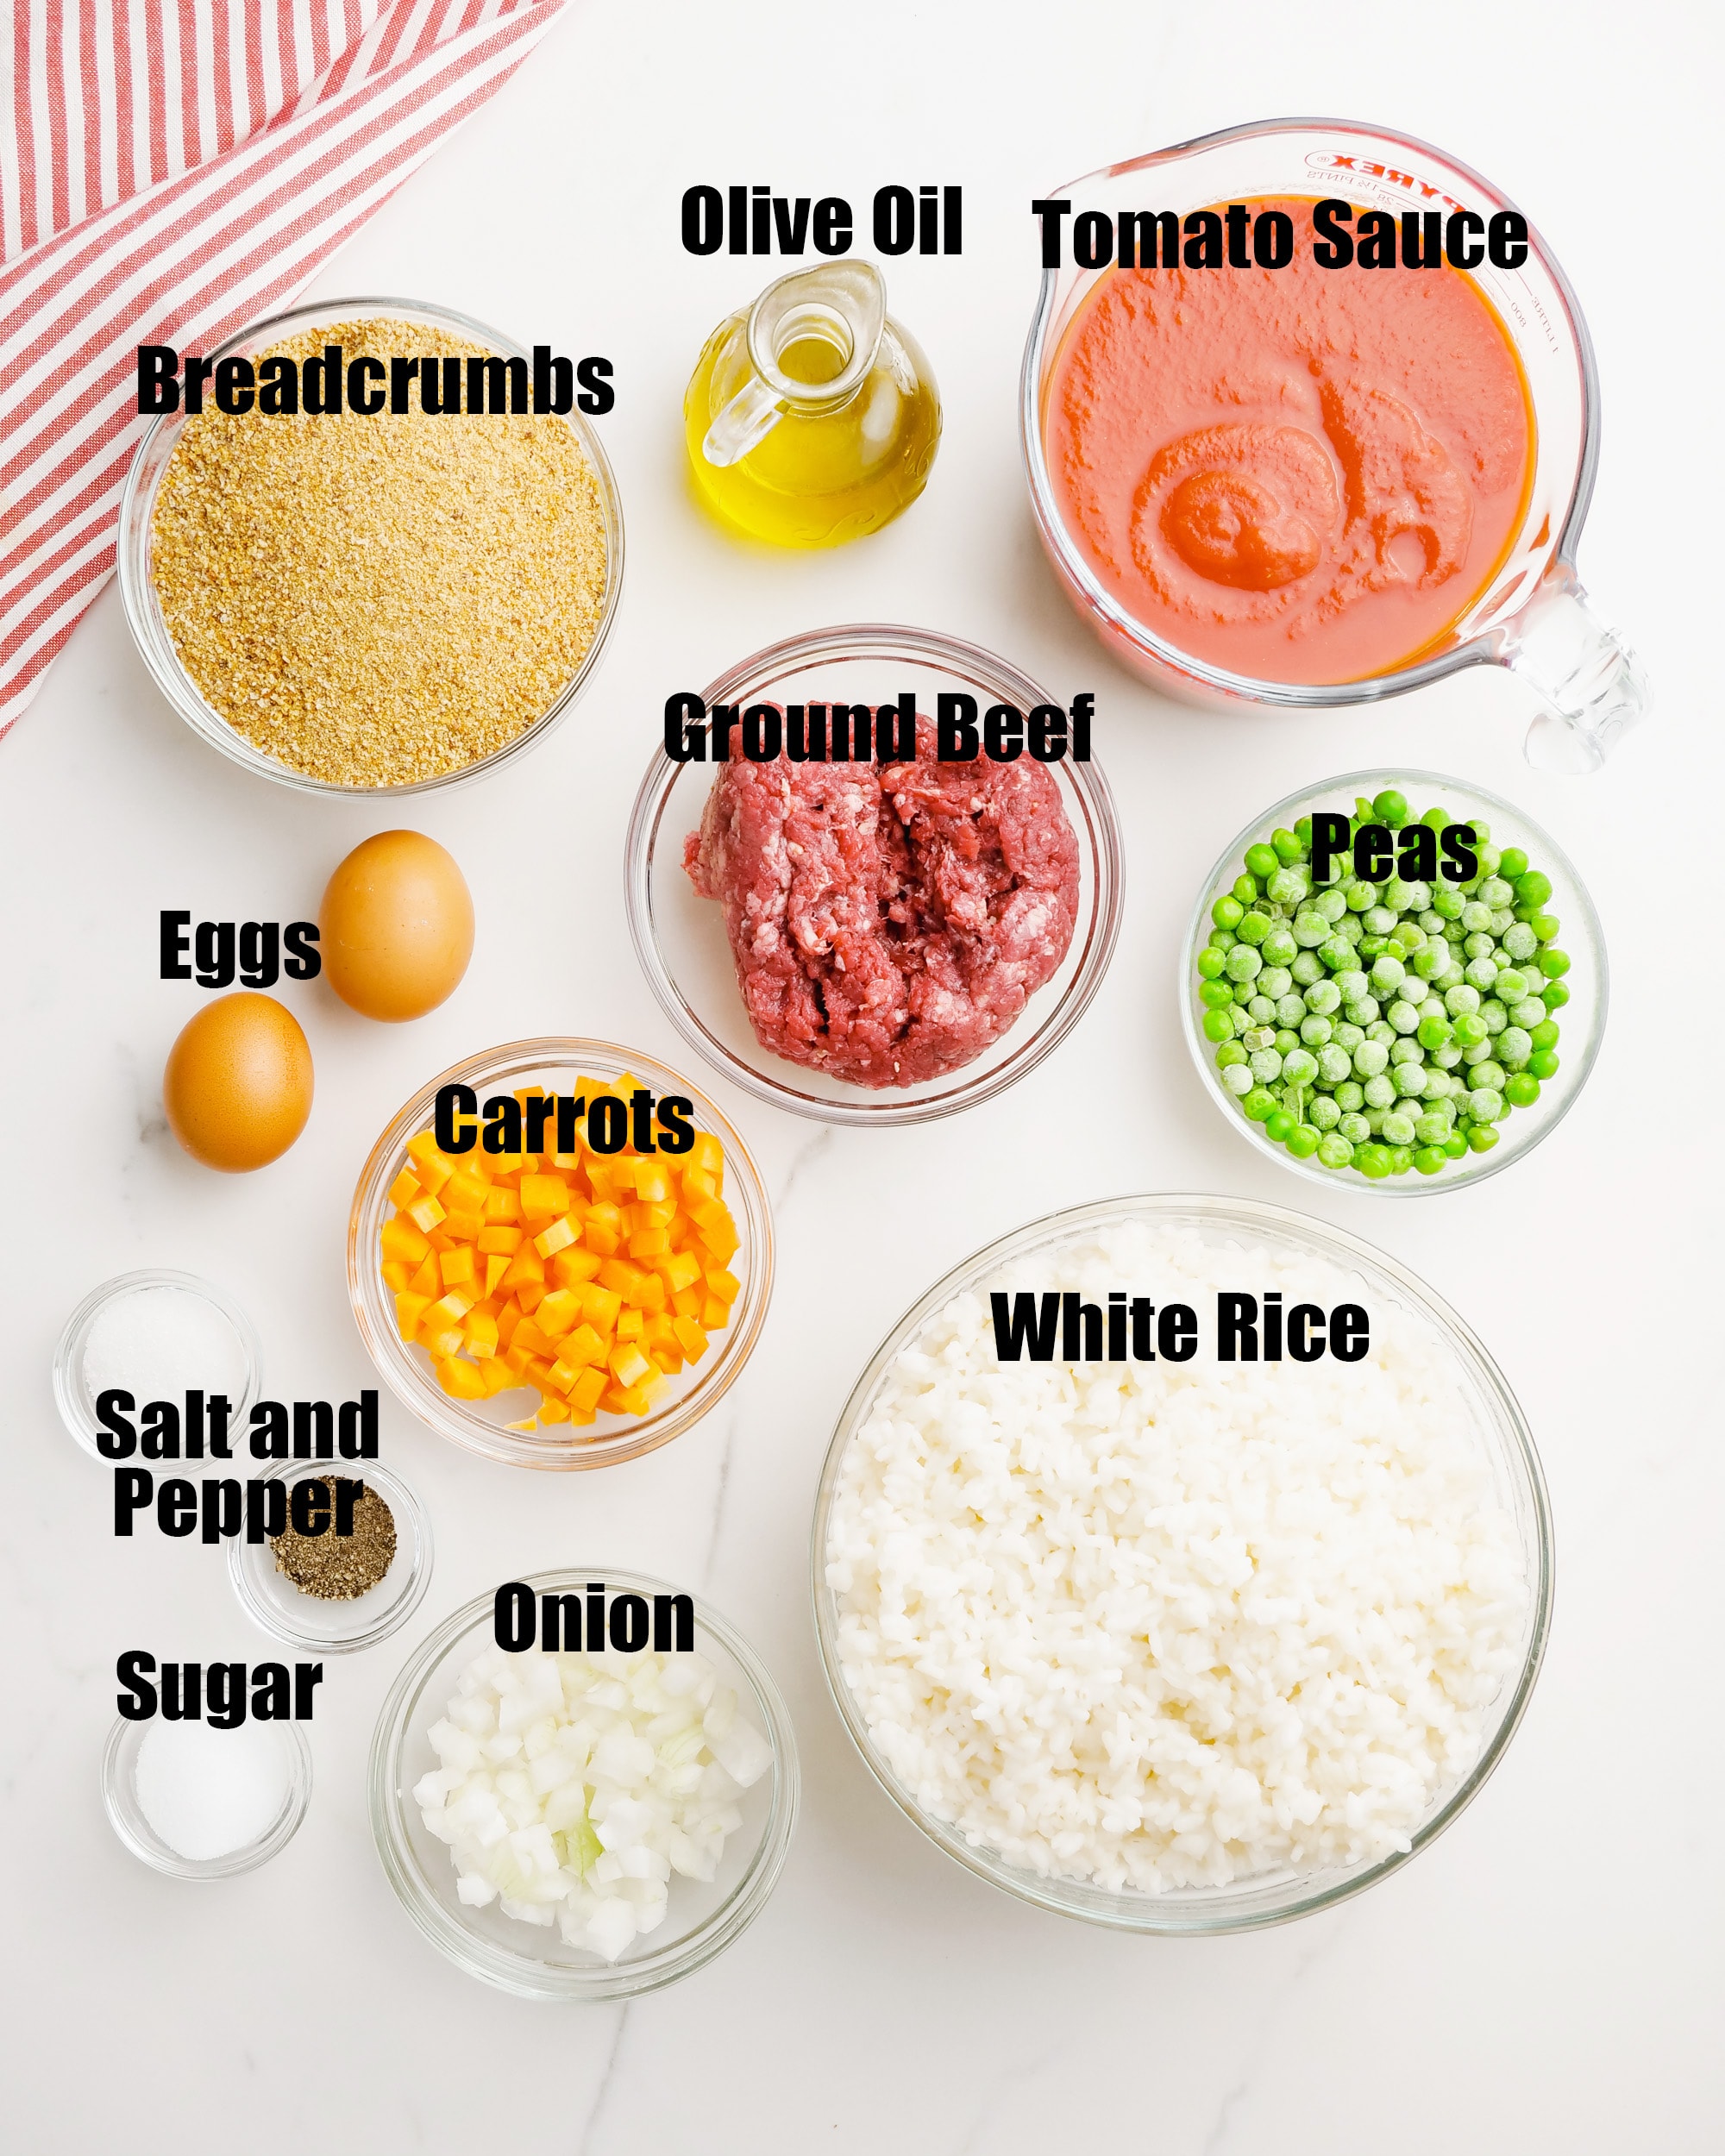 The ingredients needed to make arancini rice balls.